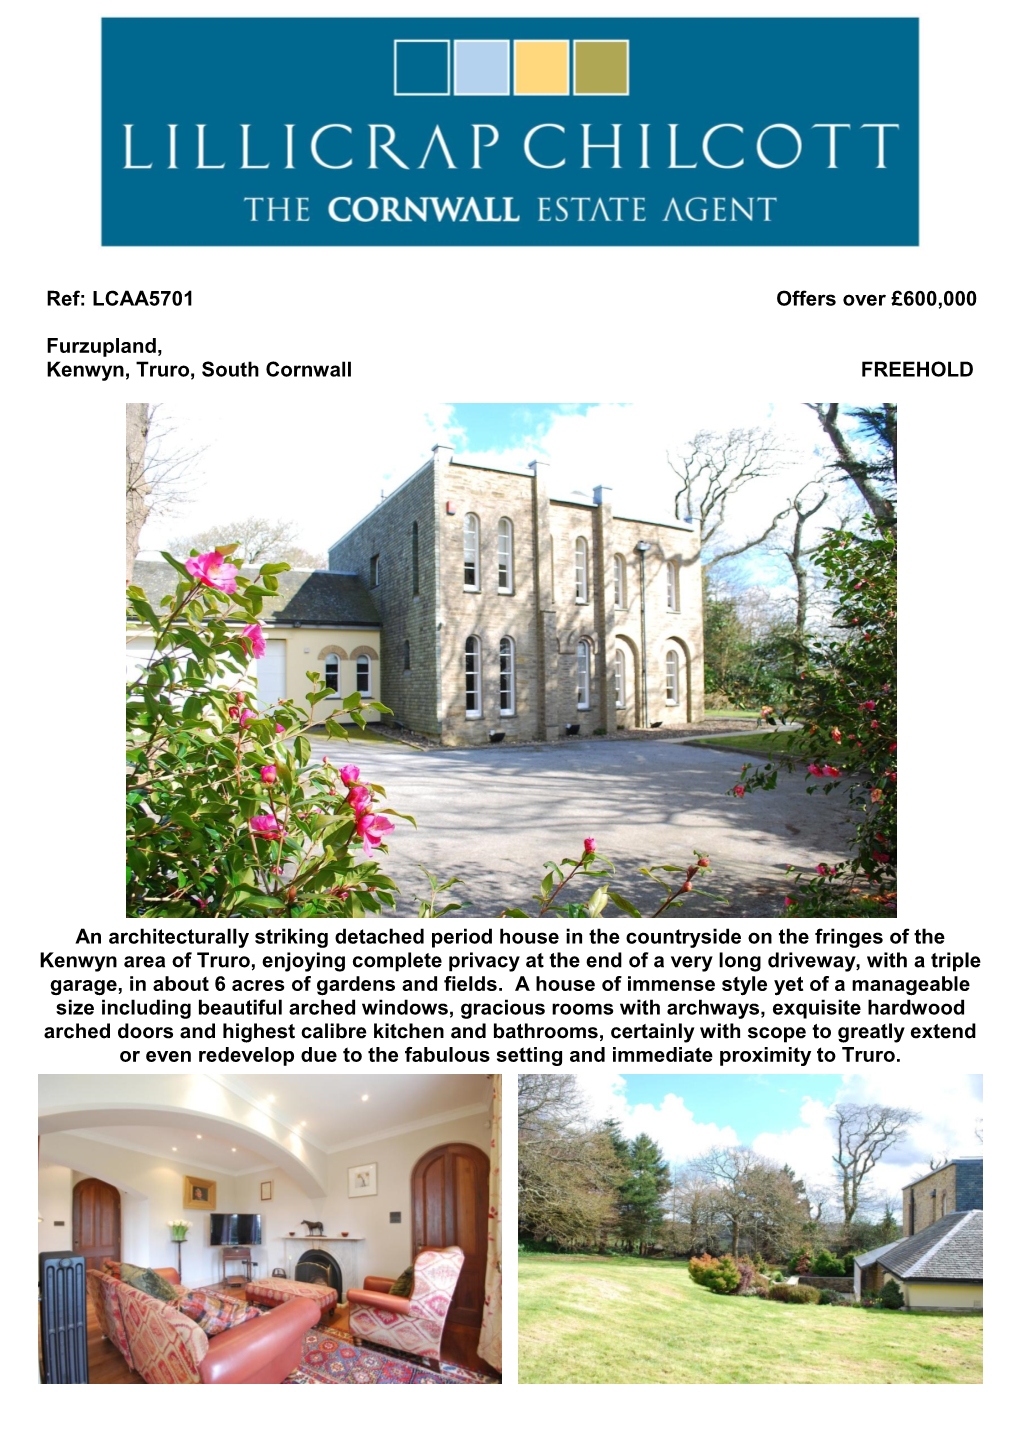 Ref: LCAA5701 Offers Over £600,000